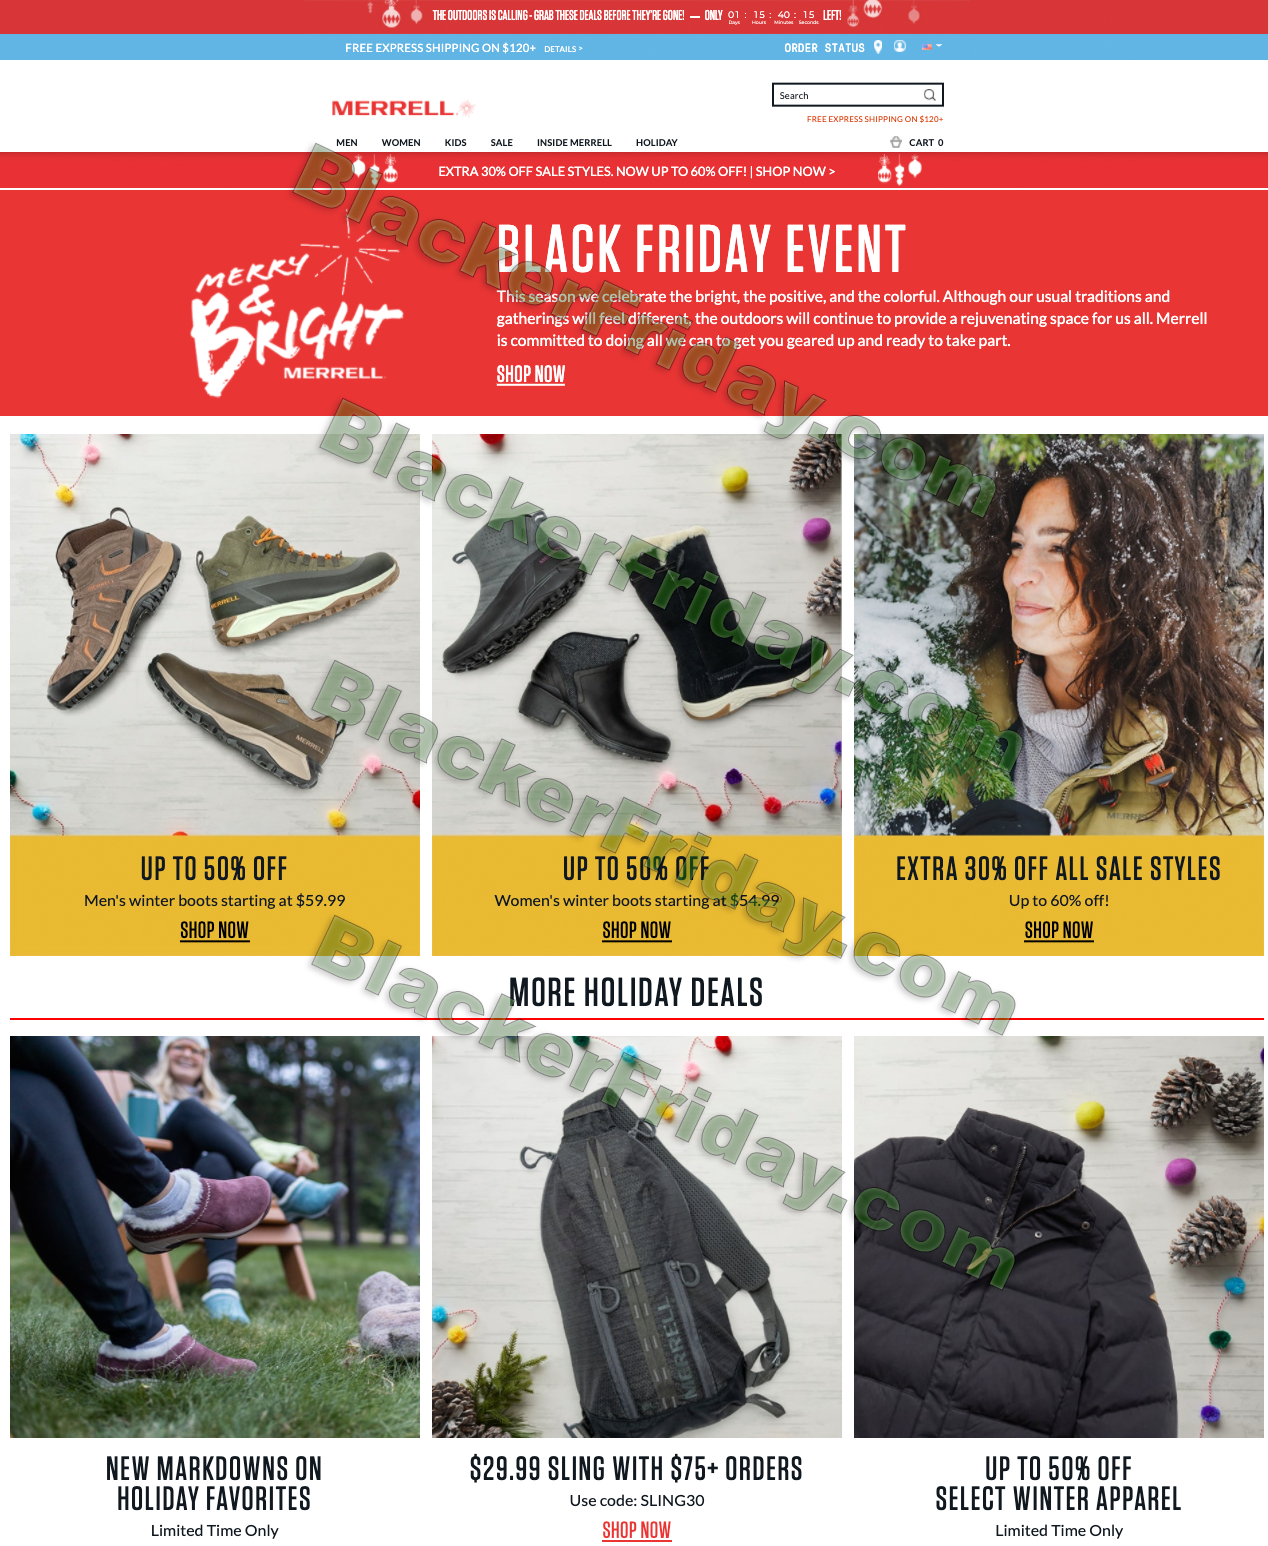 Merrell Cyber Monday 2021 Sale - What 